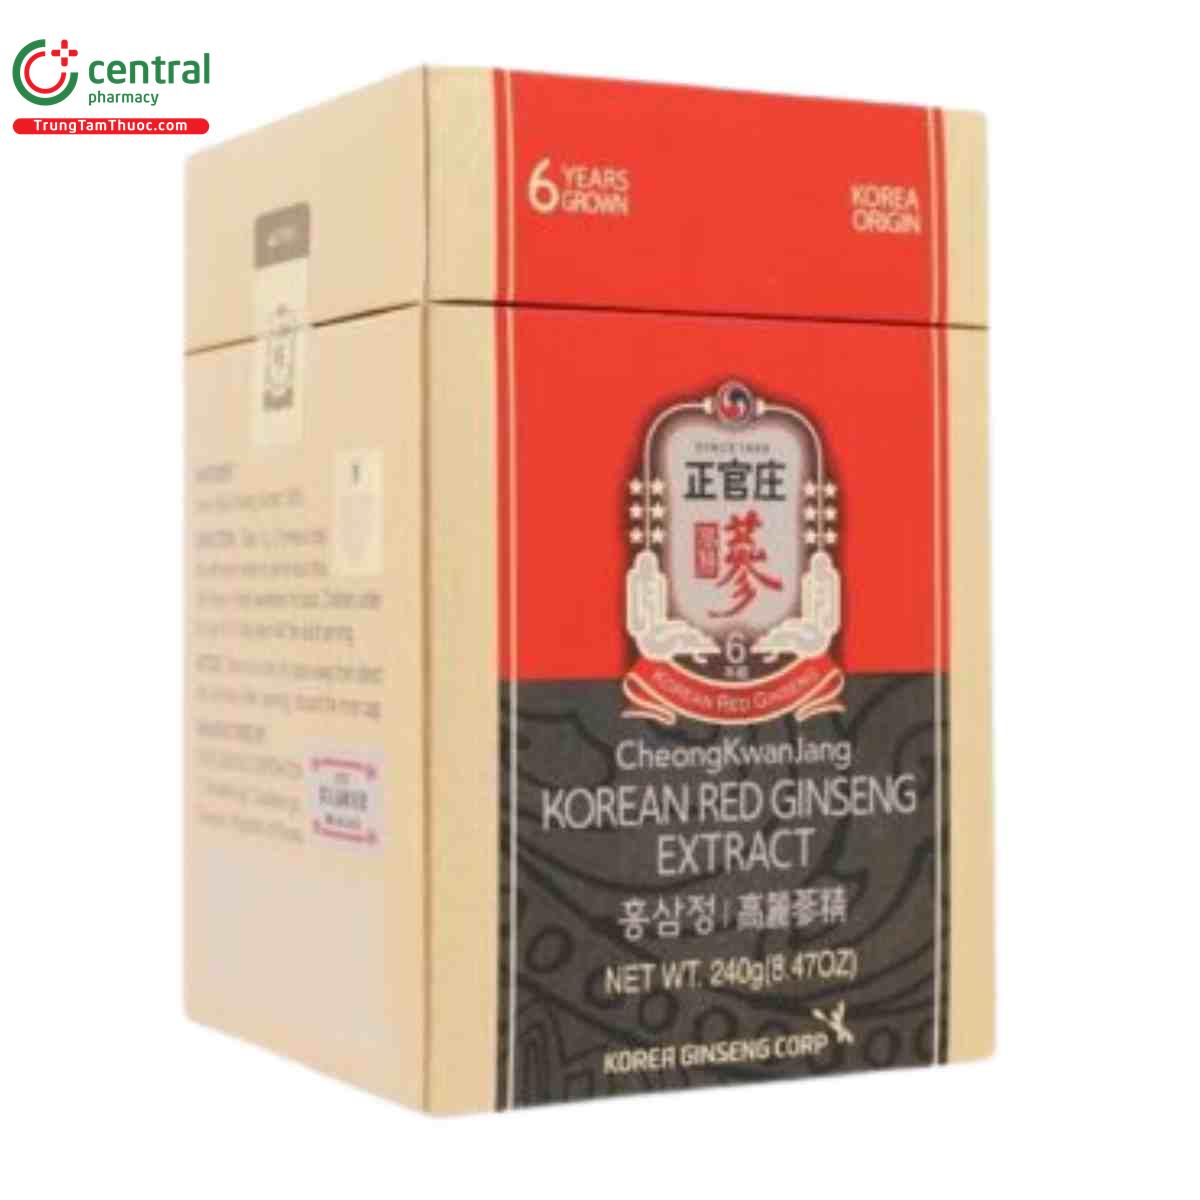 korean red ginseng extract lo 240g 3 O6154